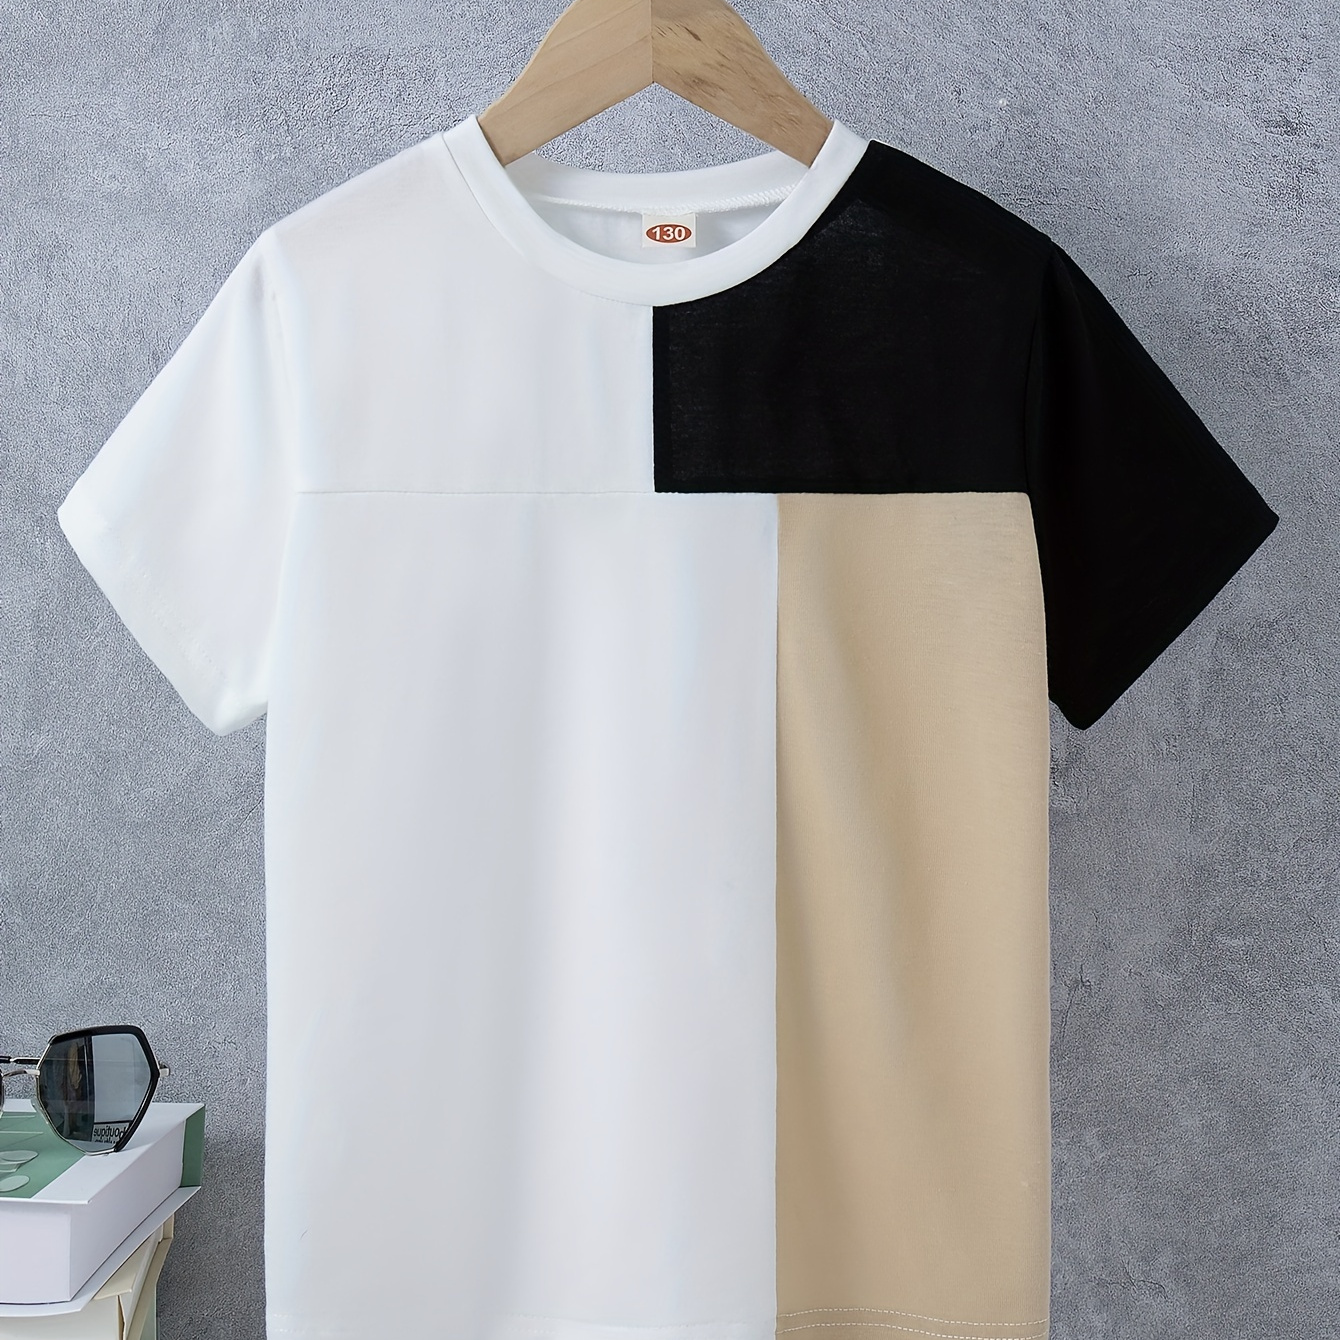 

Trendy Color Block Crew Neck T-shirt, Short Sleeve Casual Comfy Summer Tee Tops For Boys